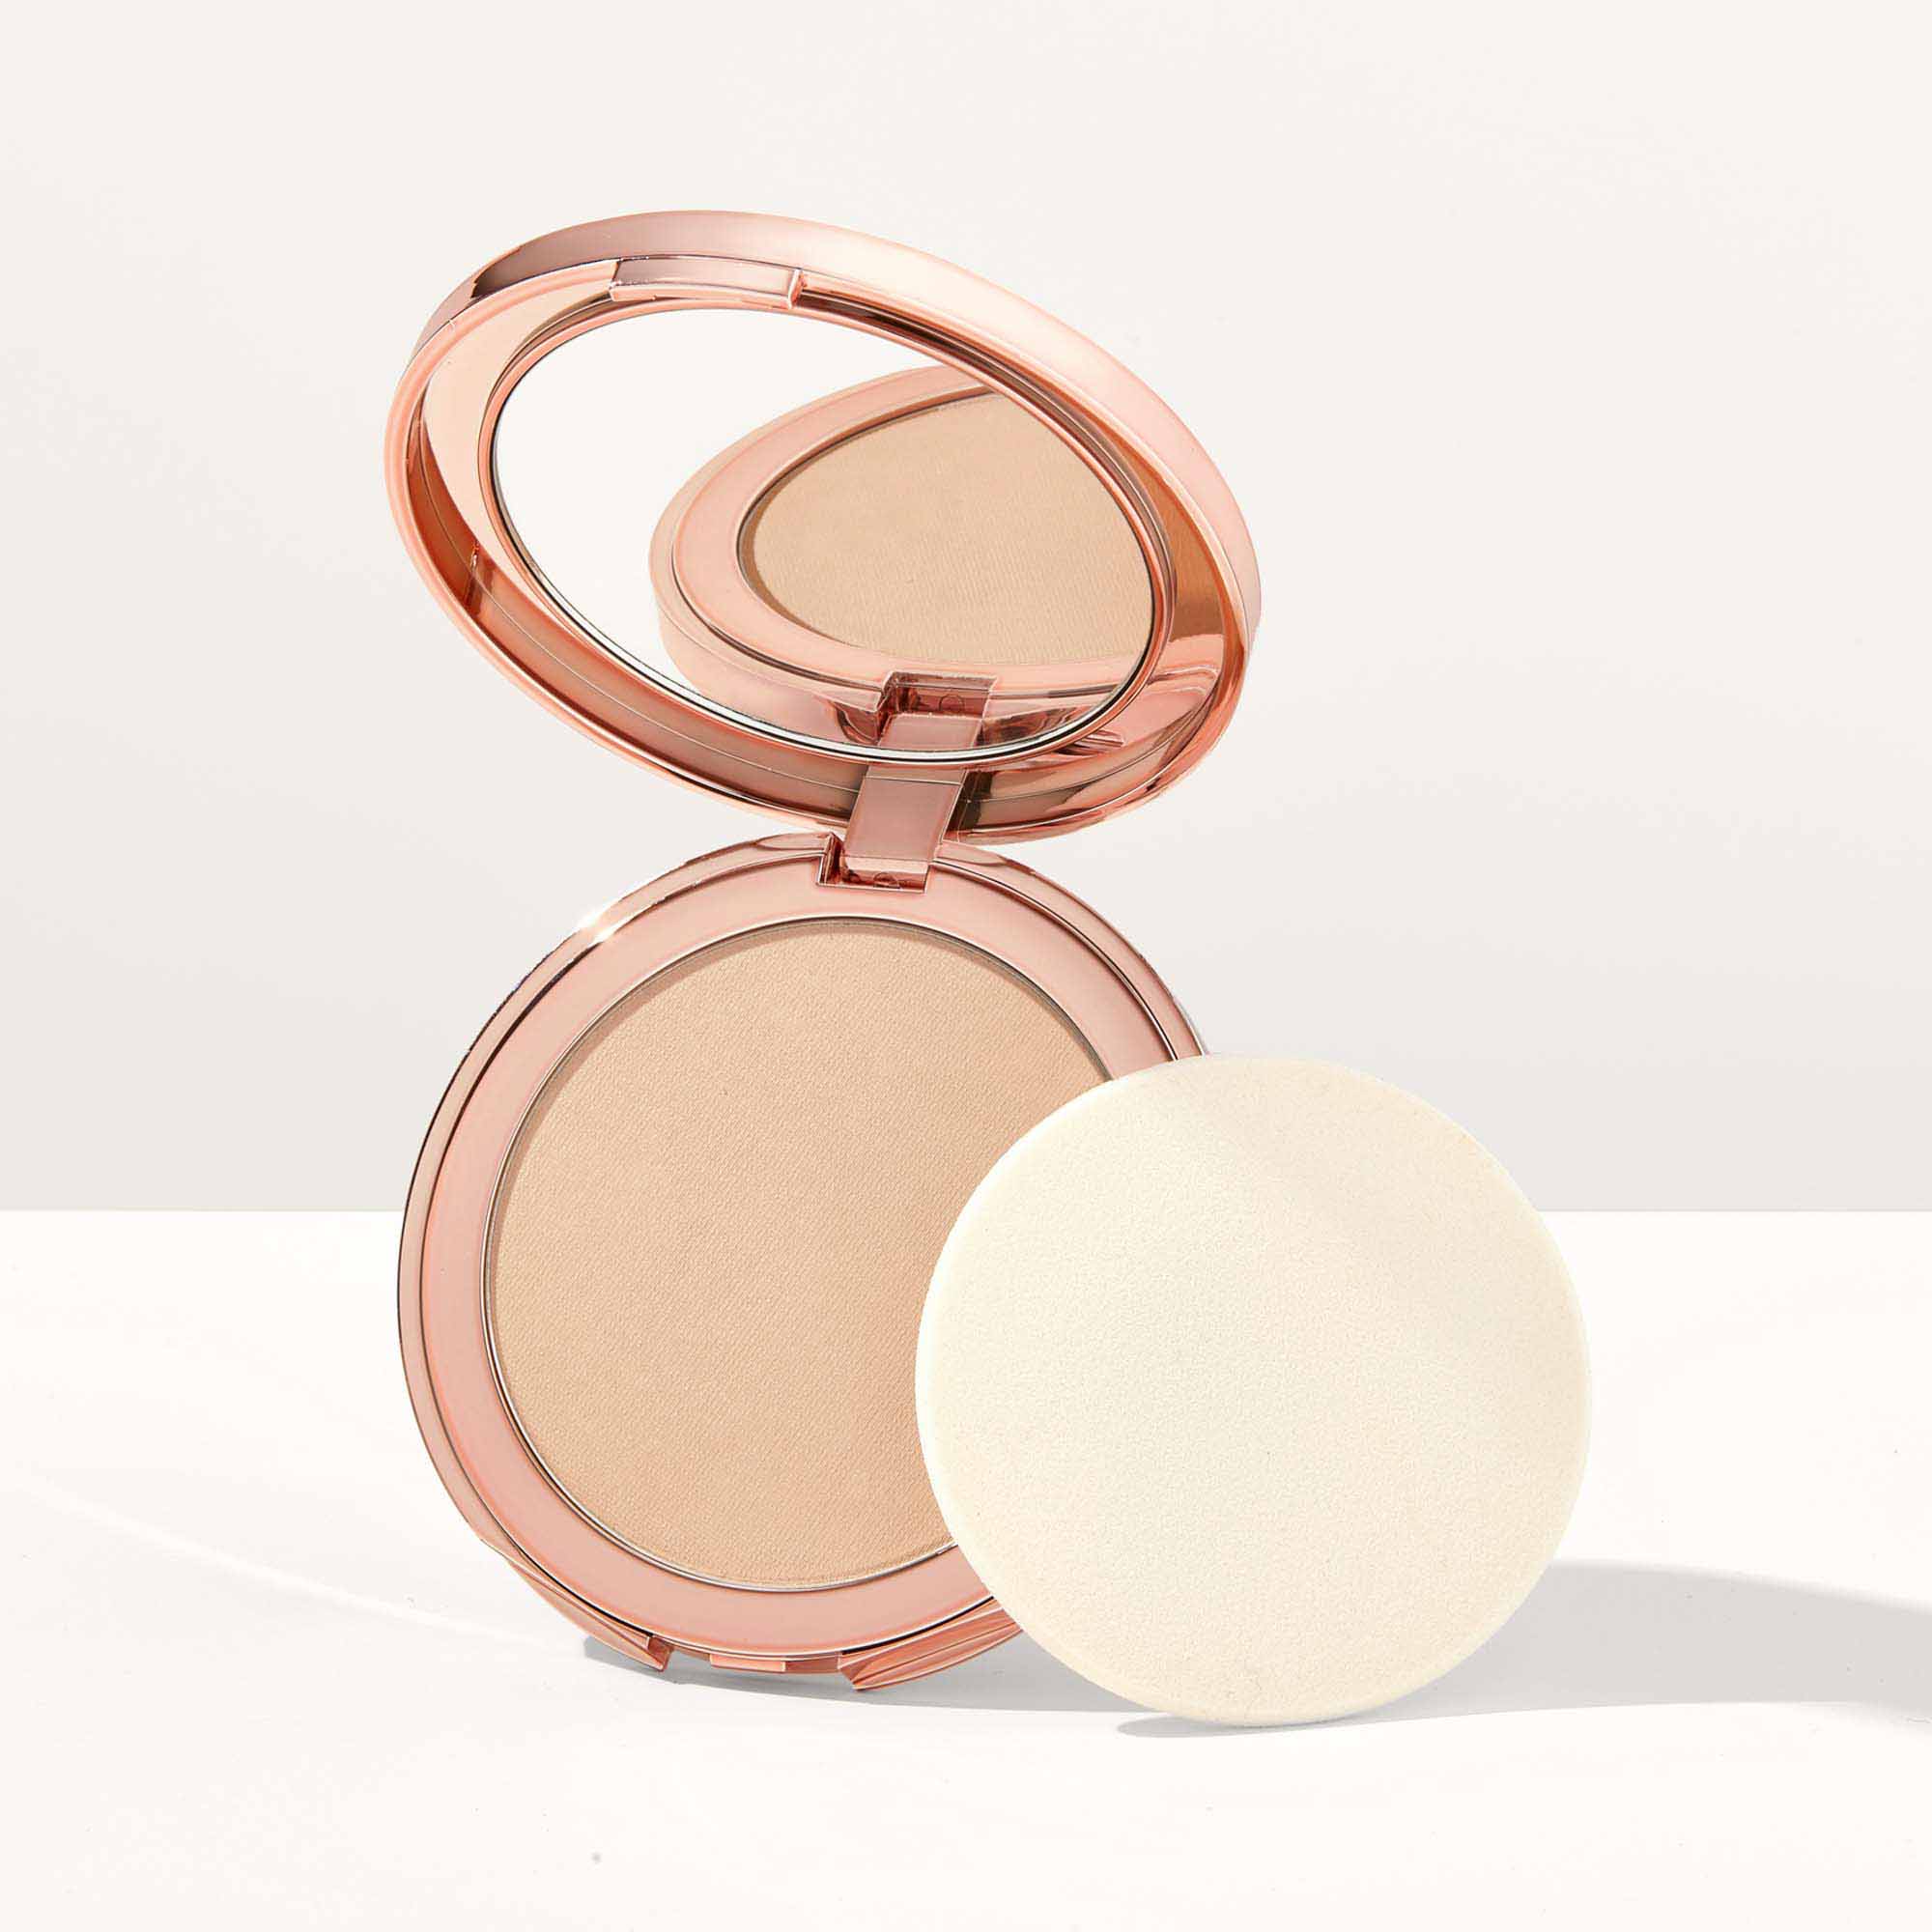 Tarte Cosmetics Smooth Operatorâ?¢ Amazonian Clay Tinted Pressed Finishing Powder In White